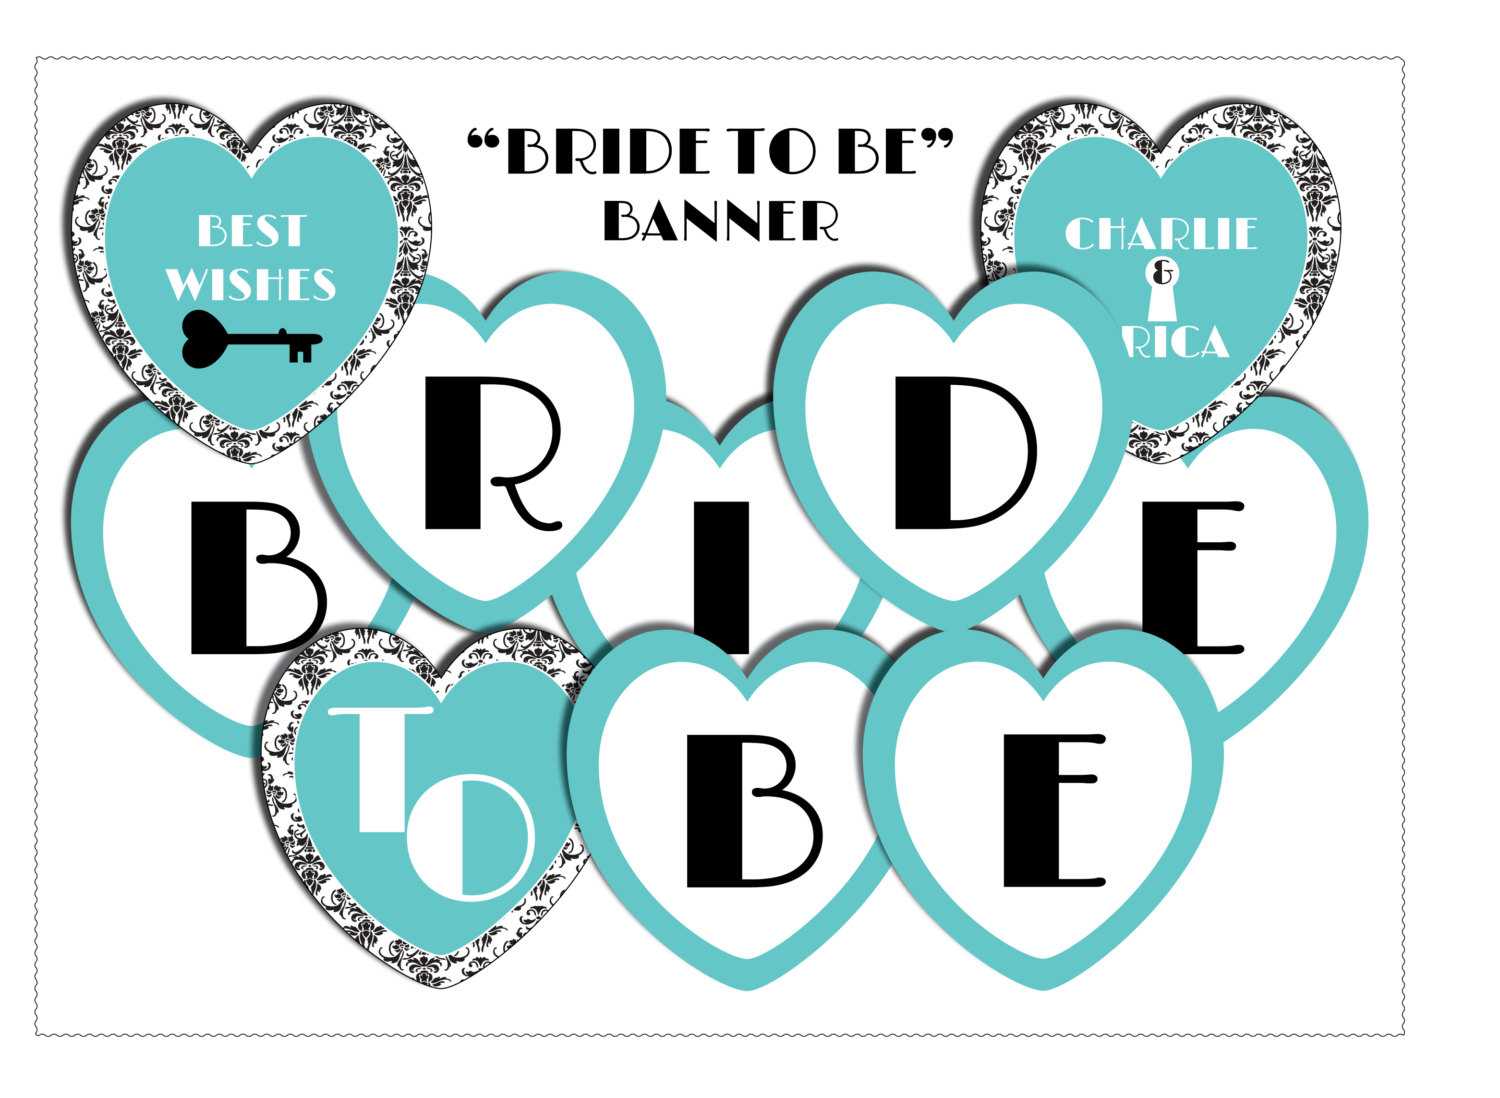 From Miss To Mrs Banner Template – Best Banner Design 2018 Throughout Bridal Shower Banner Template